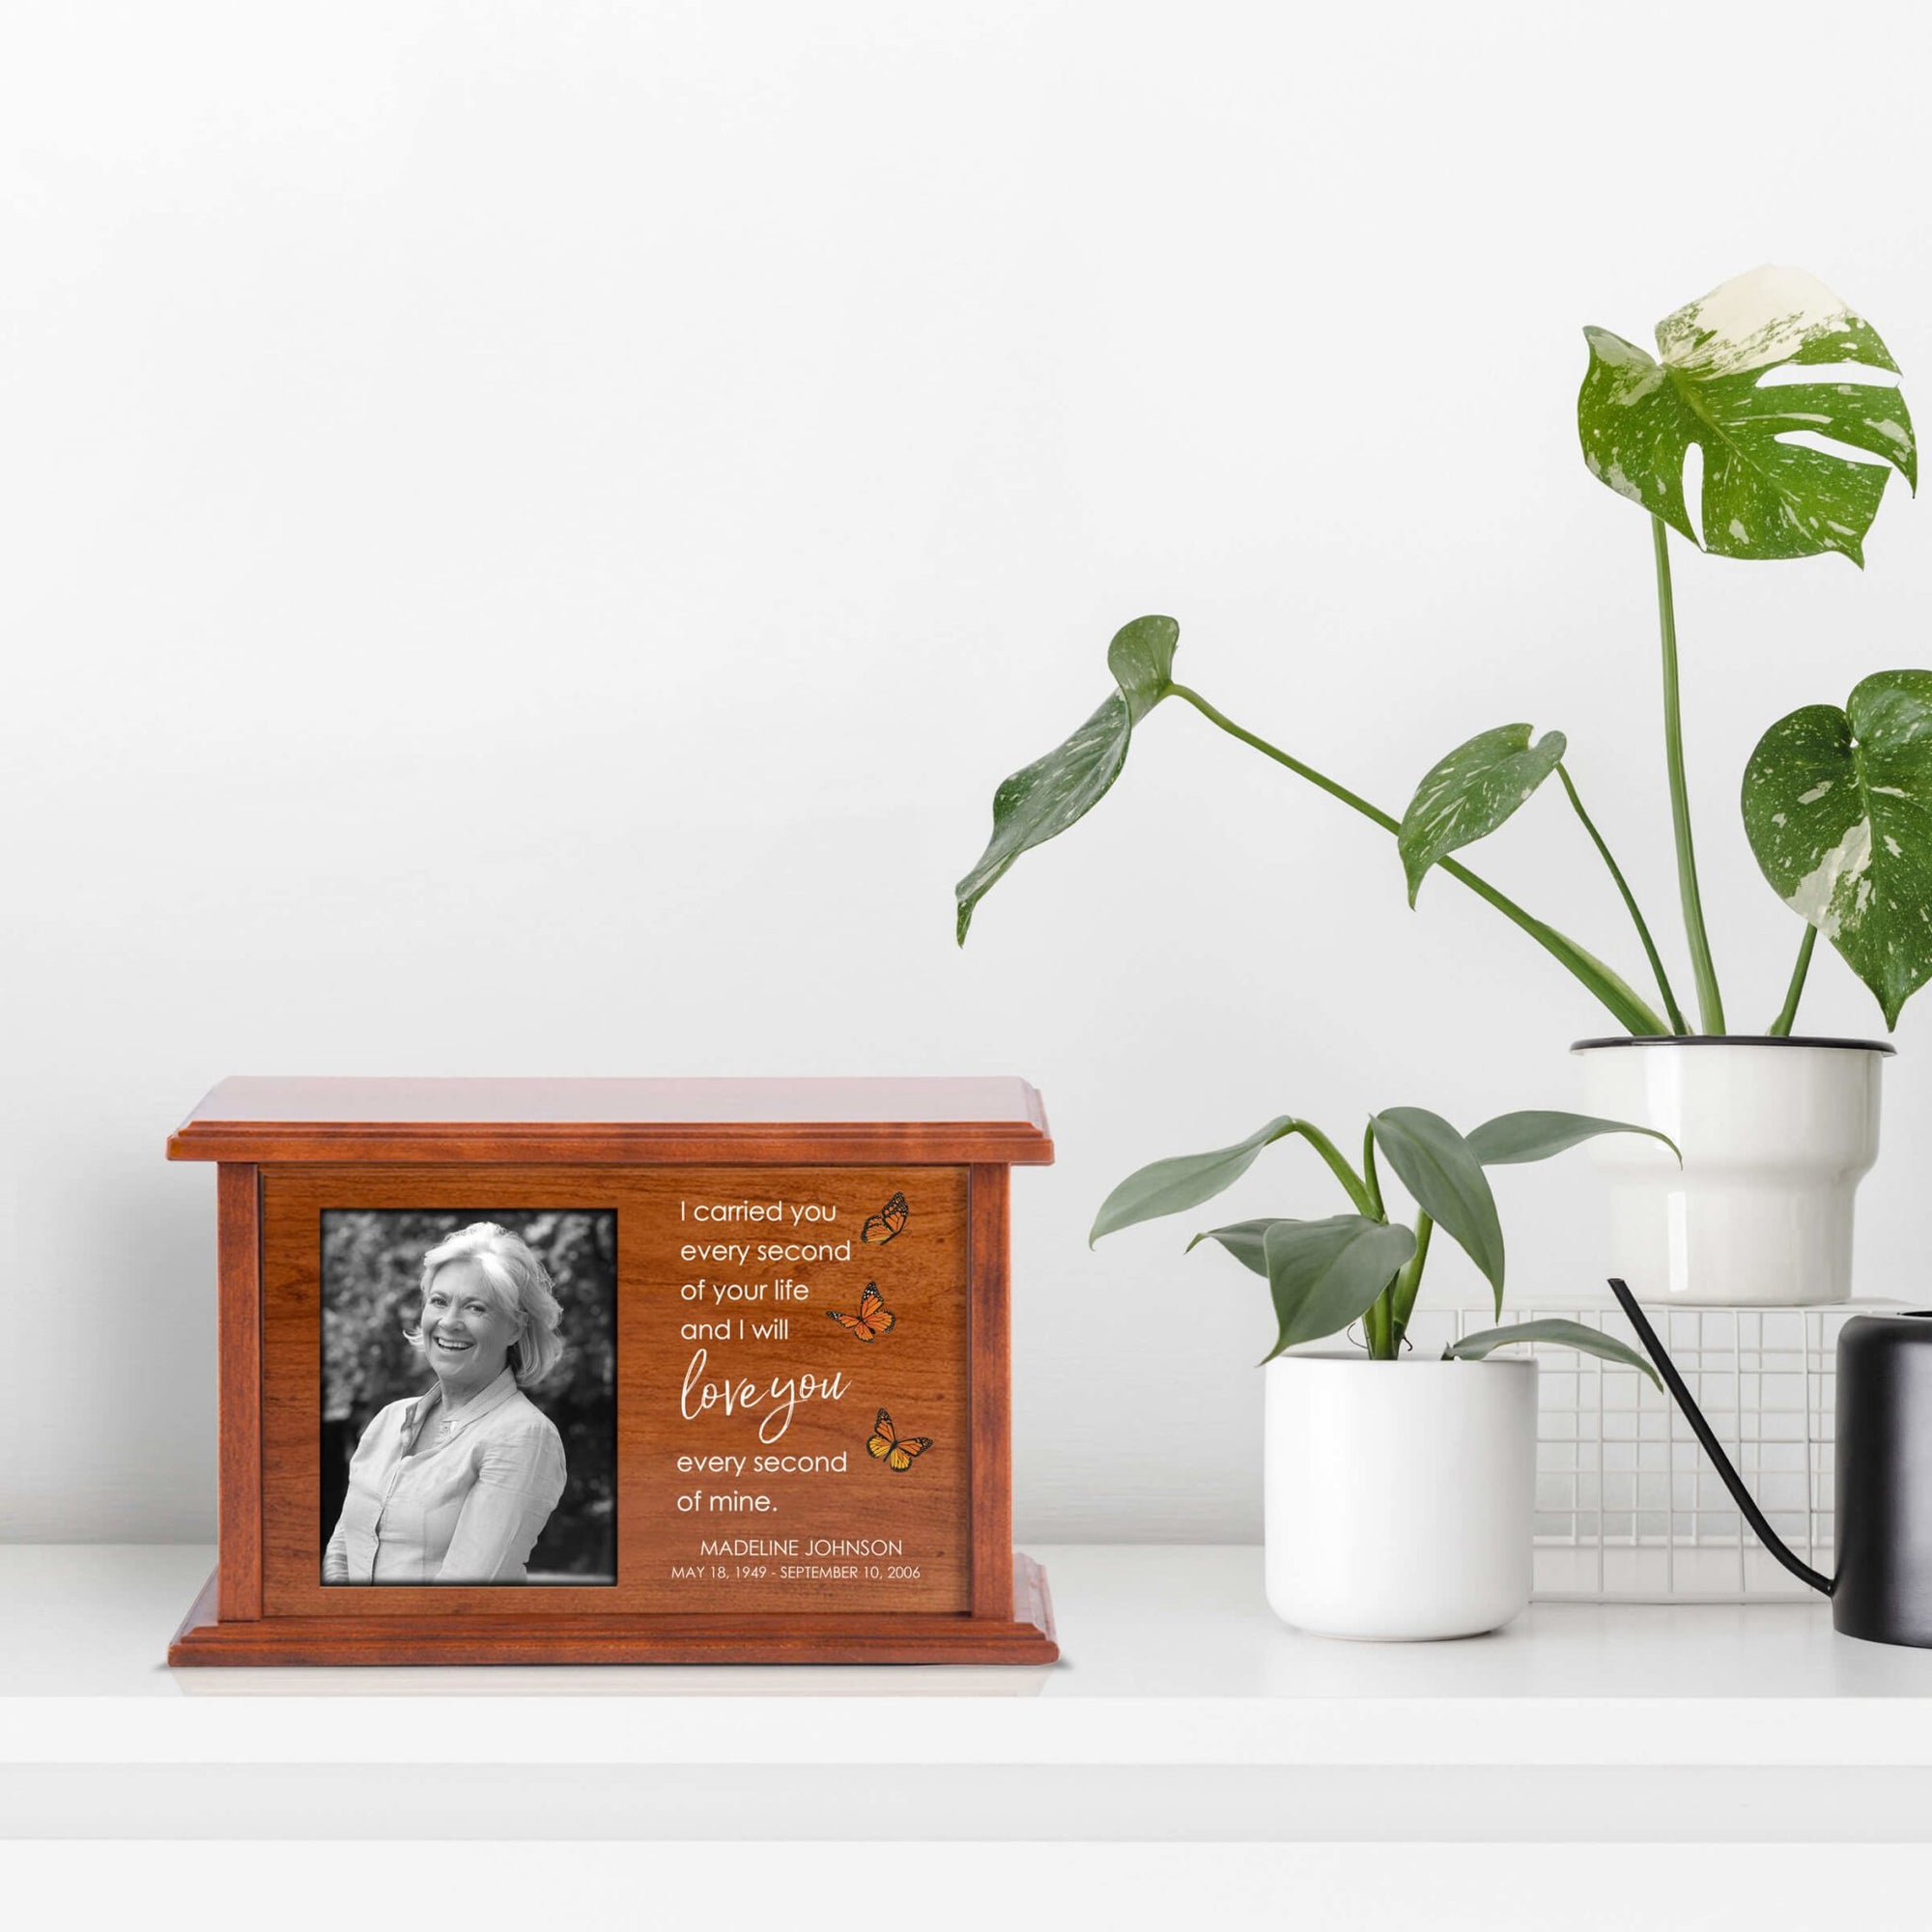 Custom Engraved Photo Cremation Urn - I Carried You Every Second - LifeSong Milestones